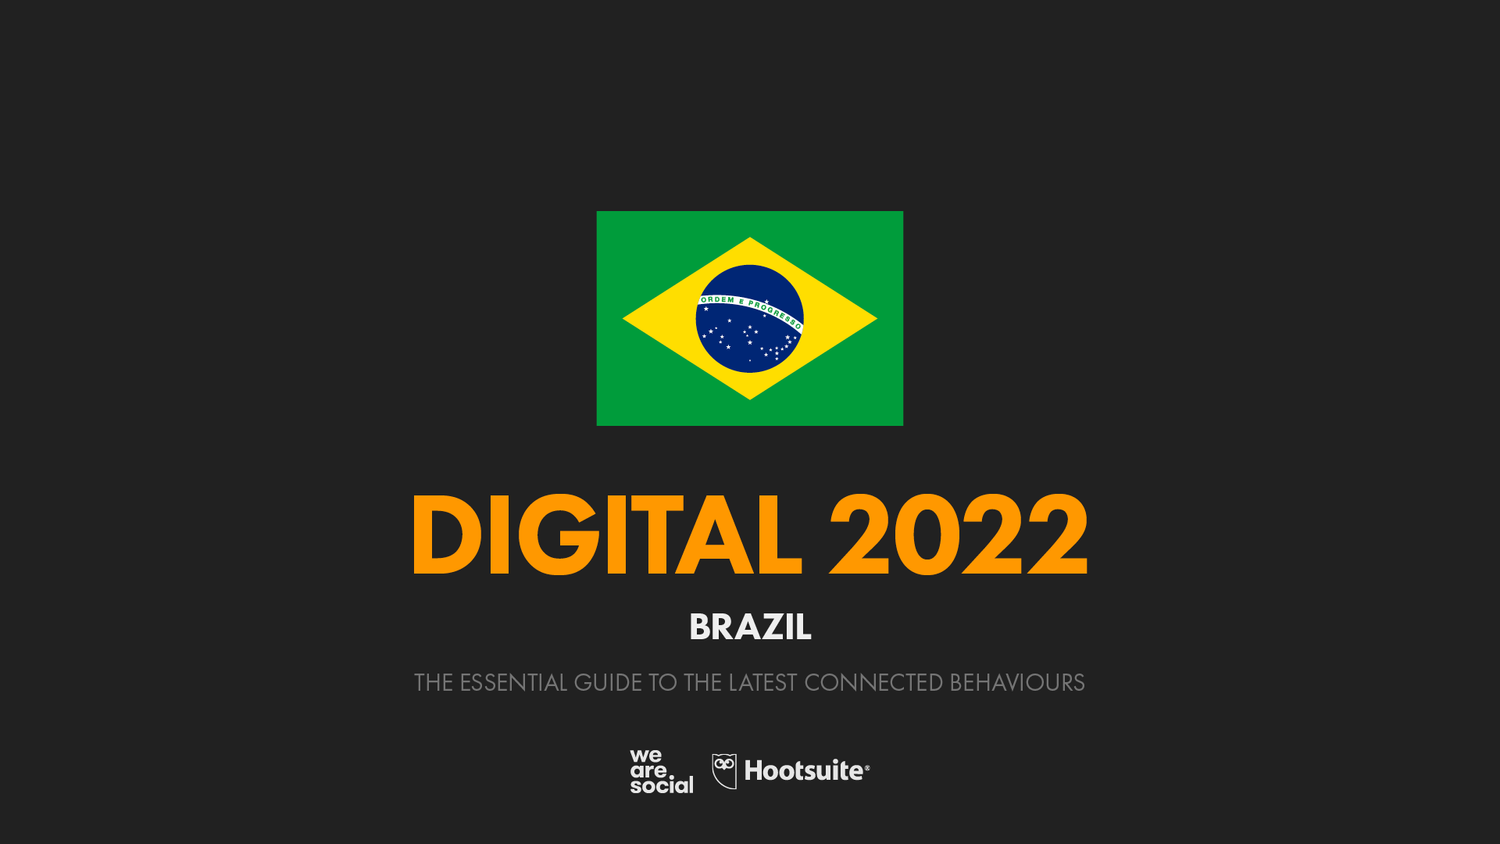 Brazil: Discord users by age group 2022